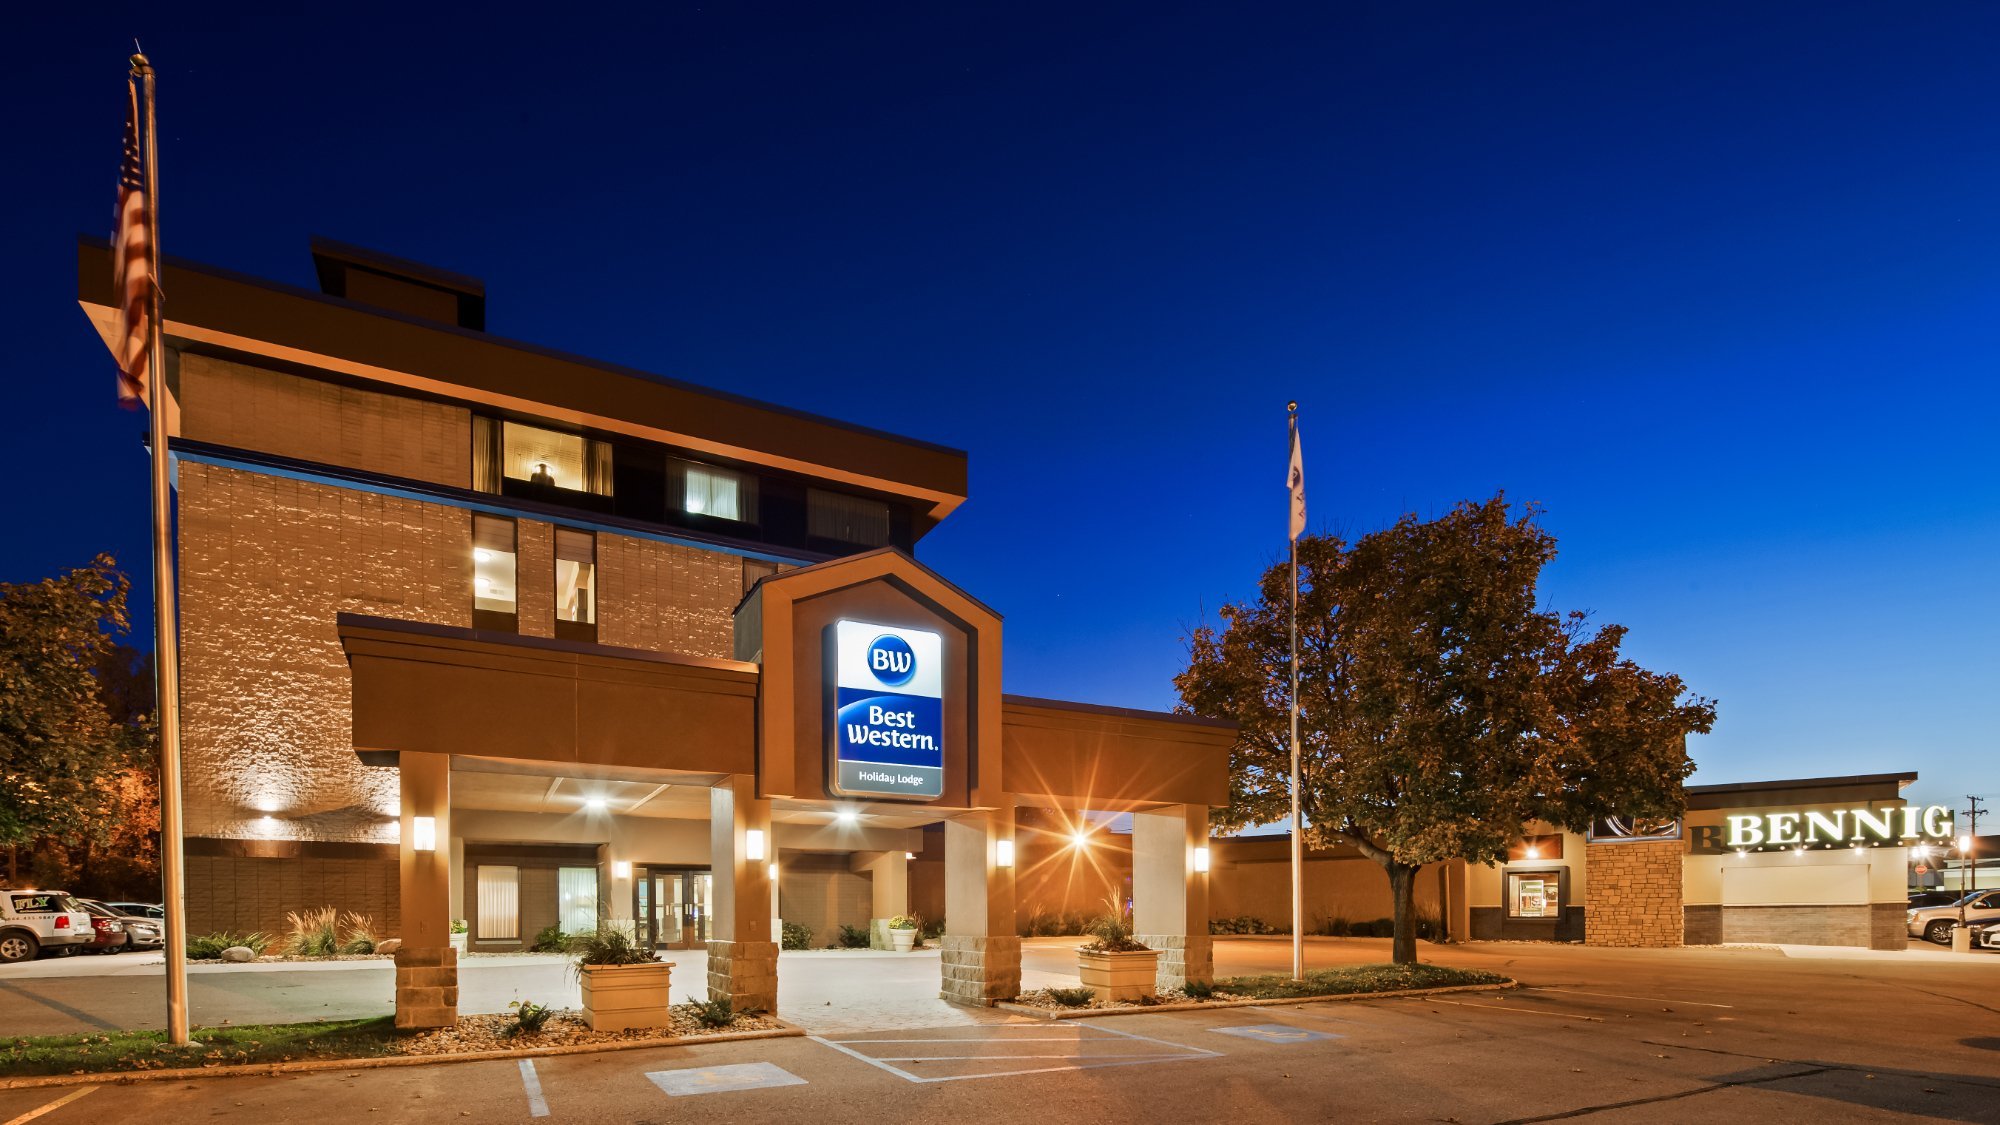 Photo of Best Western Holiday Lodge, Clear Lake, IA